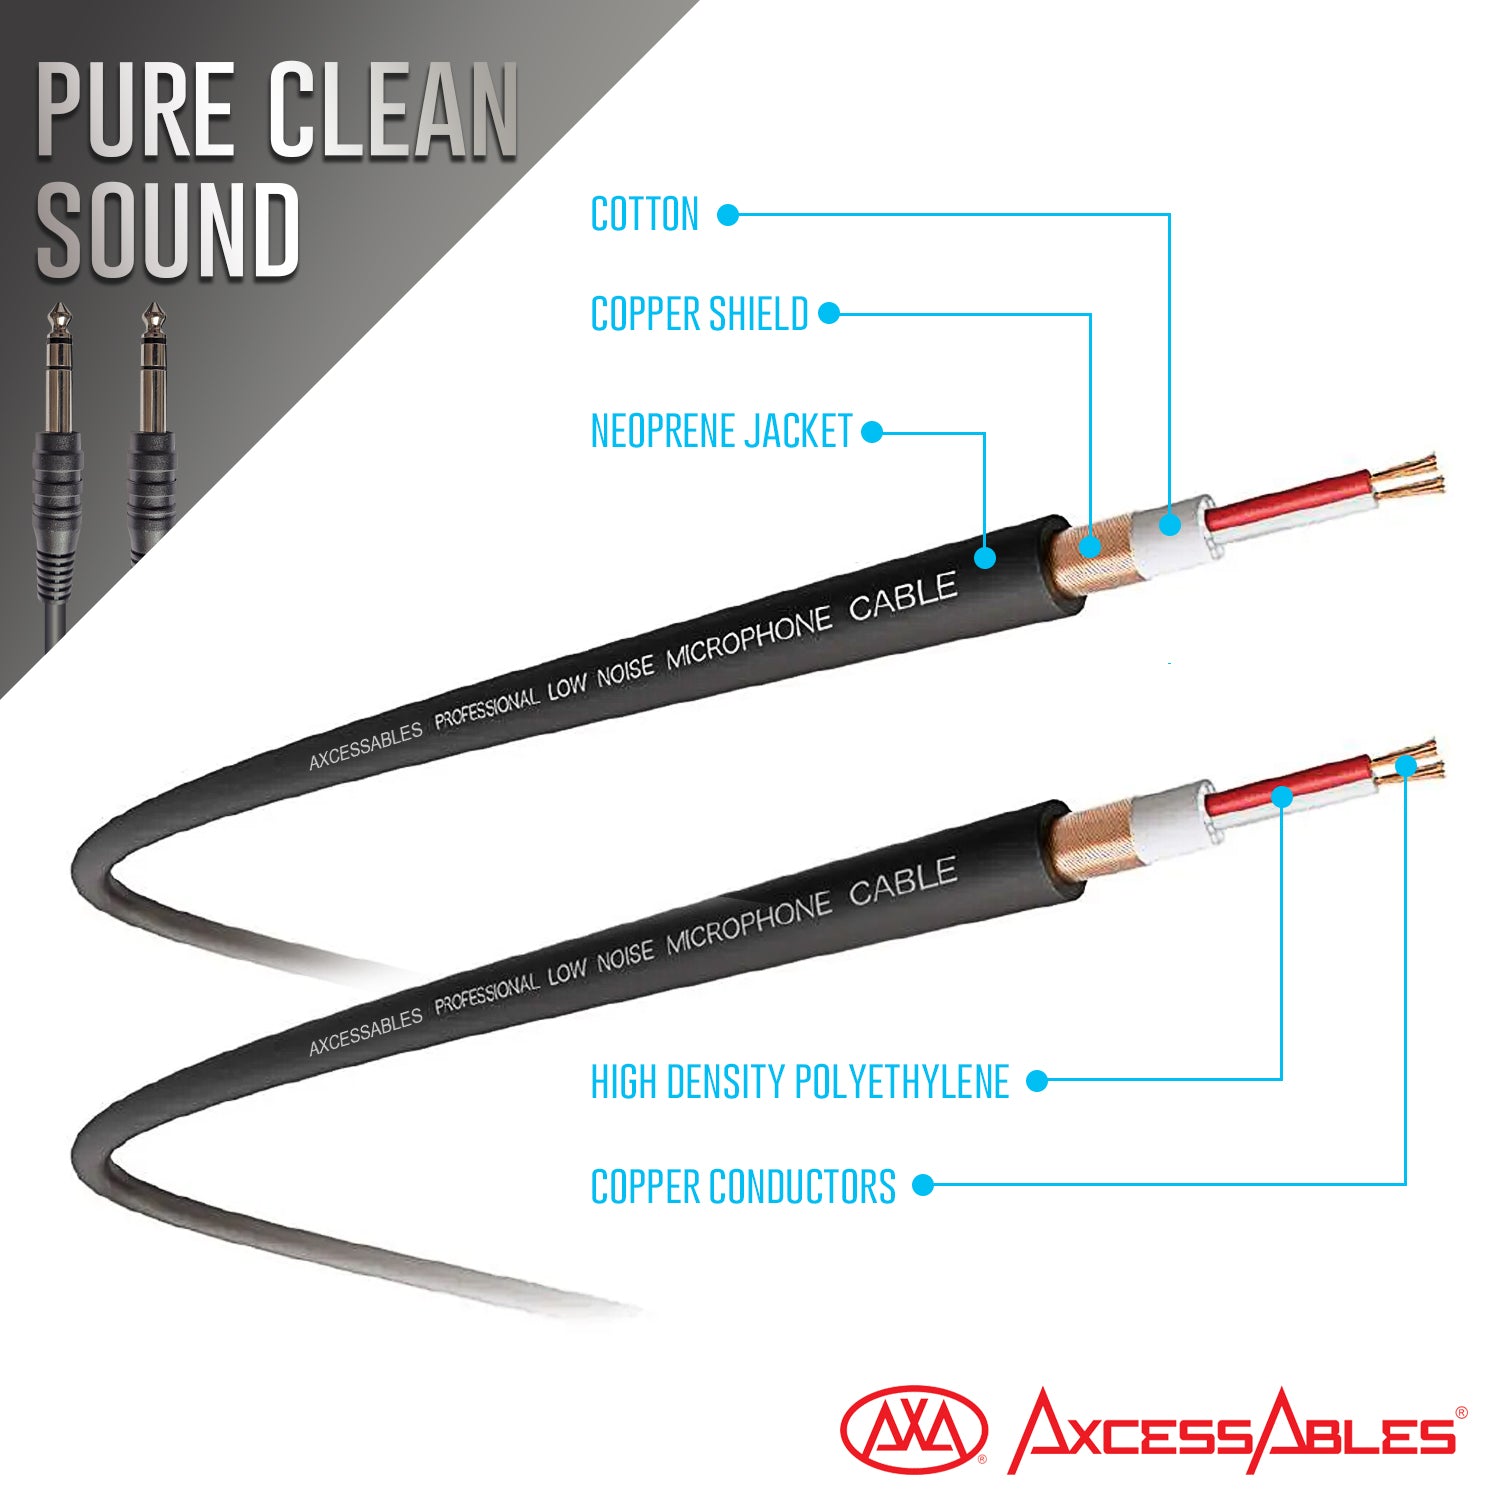 AxcessAbles 1/4 Inch TRS Instrument Cable 10ft | 6.35mm Male Jack Stereo Audio Cord | 10ft TRS to TRS Balanced Patch Cable